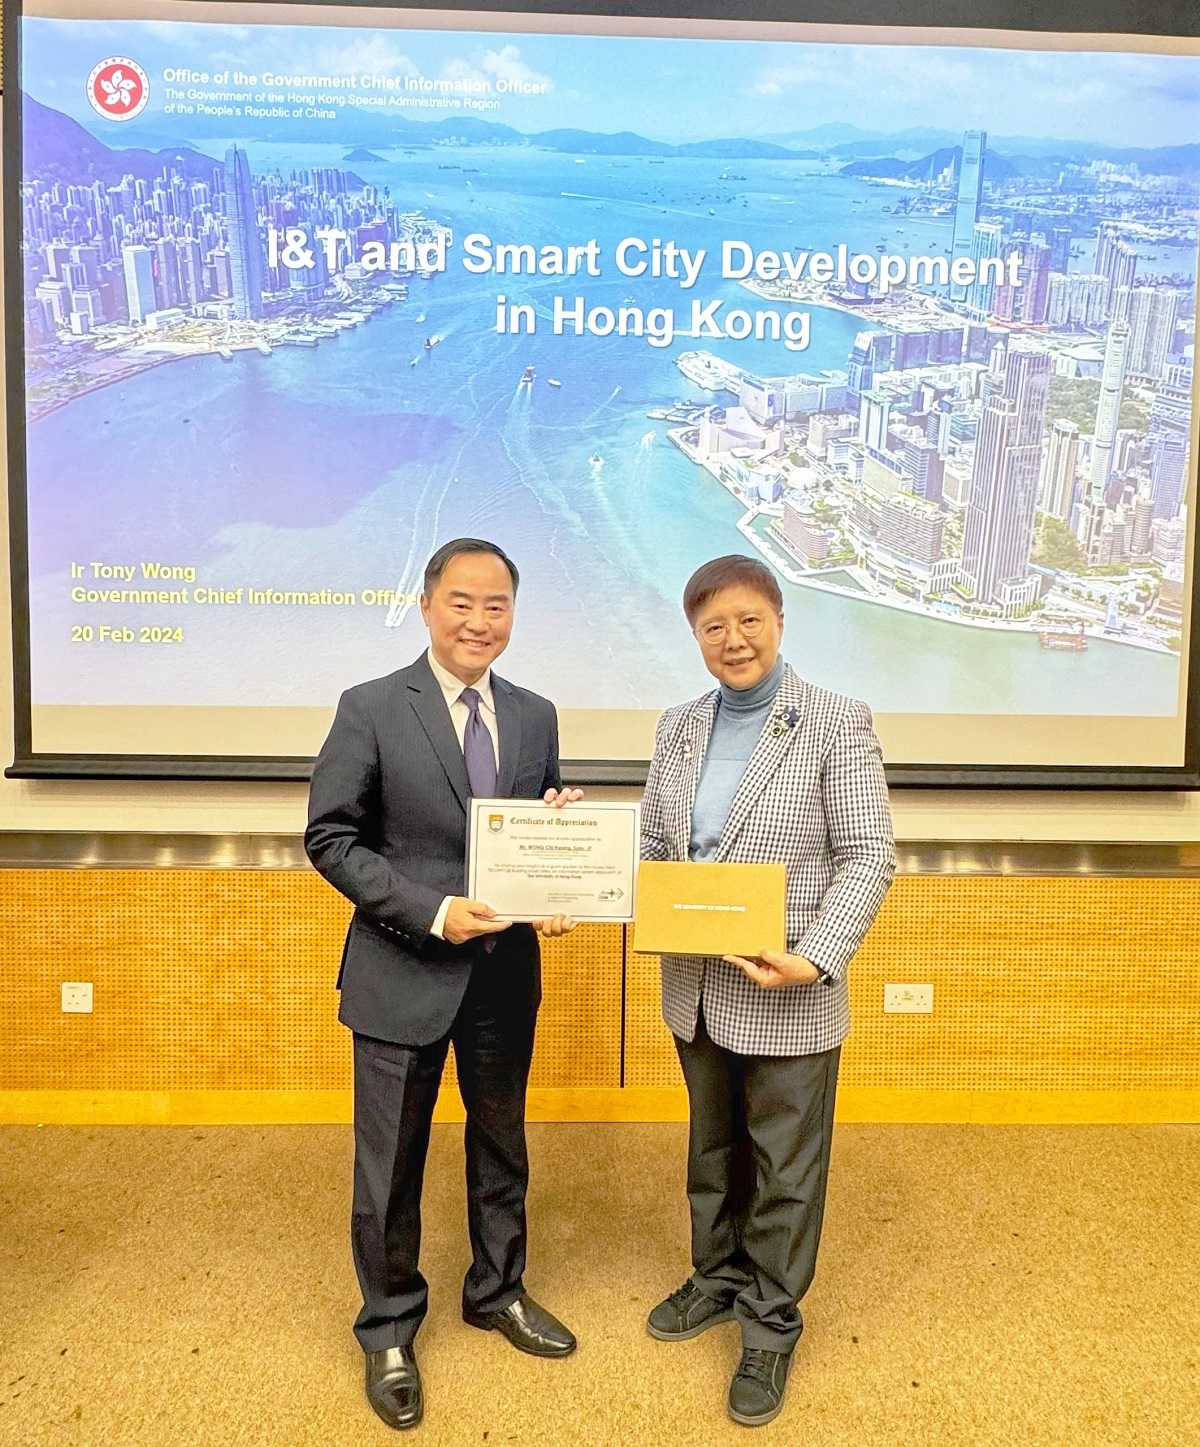 Ir Tony Wong, Government Chief Information Officer (left), received the certificate of appreciation from Dr Winnie Tang, Honorary Professor, Department of Computer Science, University of Hong Kong (right).